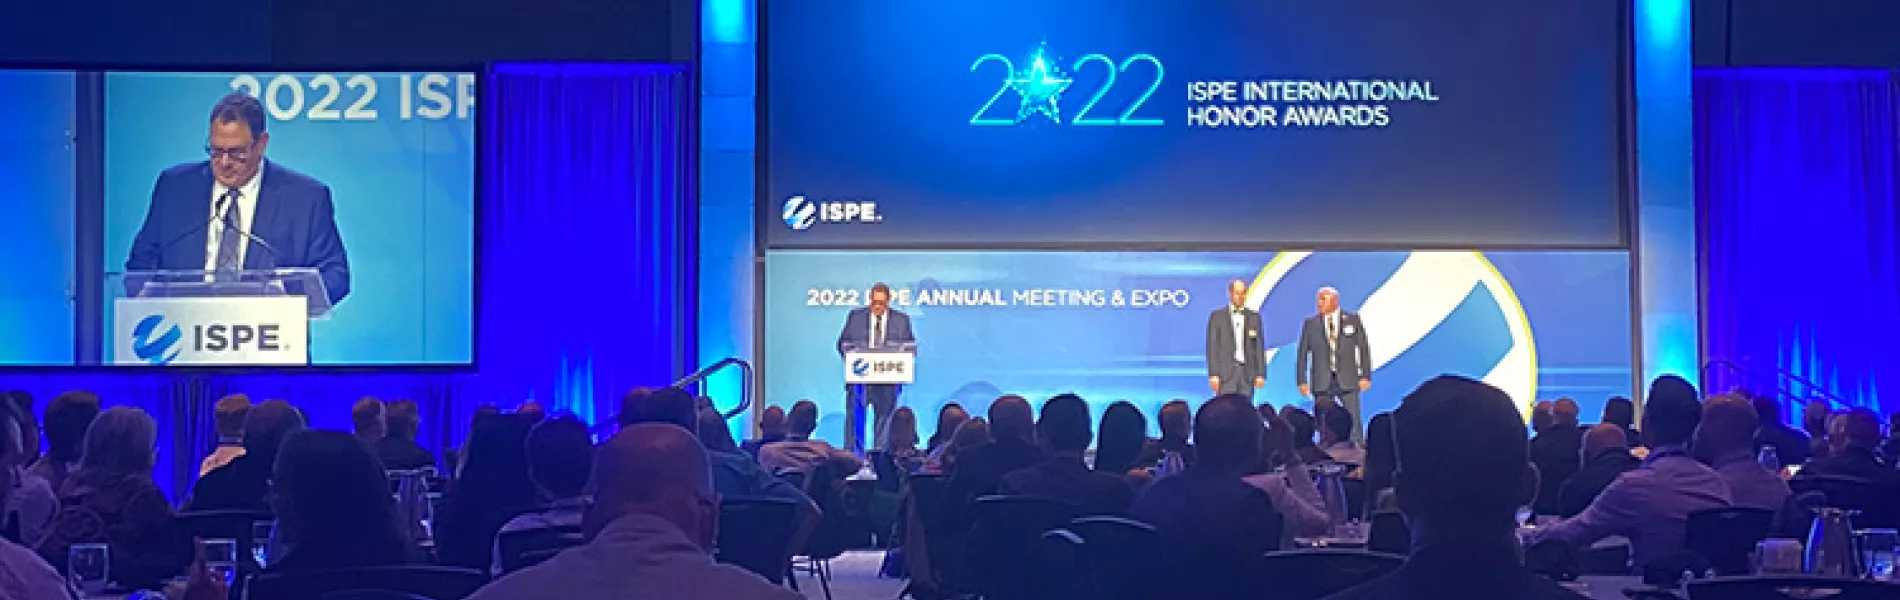 2022 ISPE Annual Meeting: New Chair, New Year of ISPE Initiatives